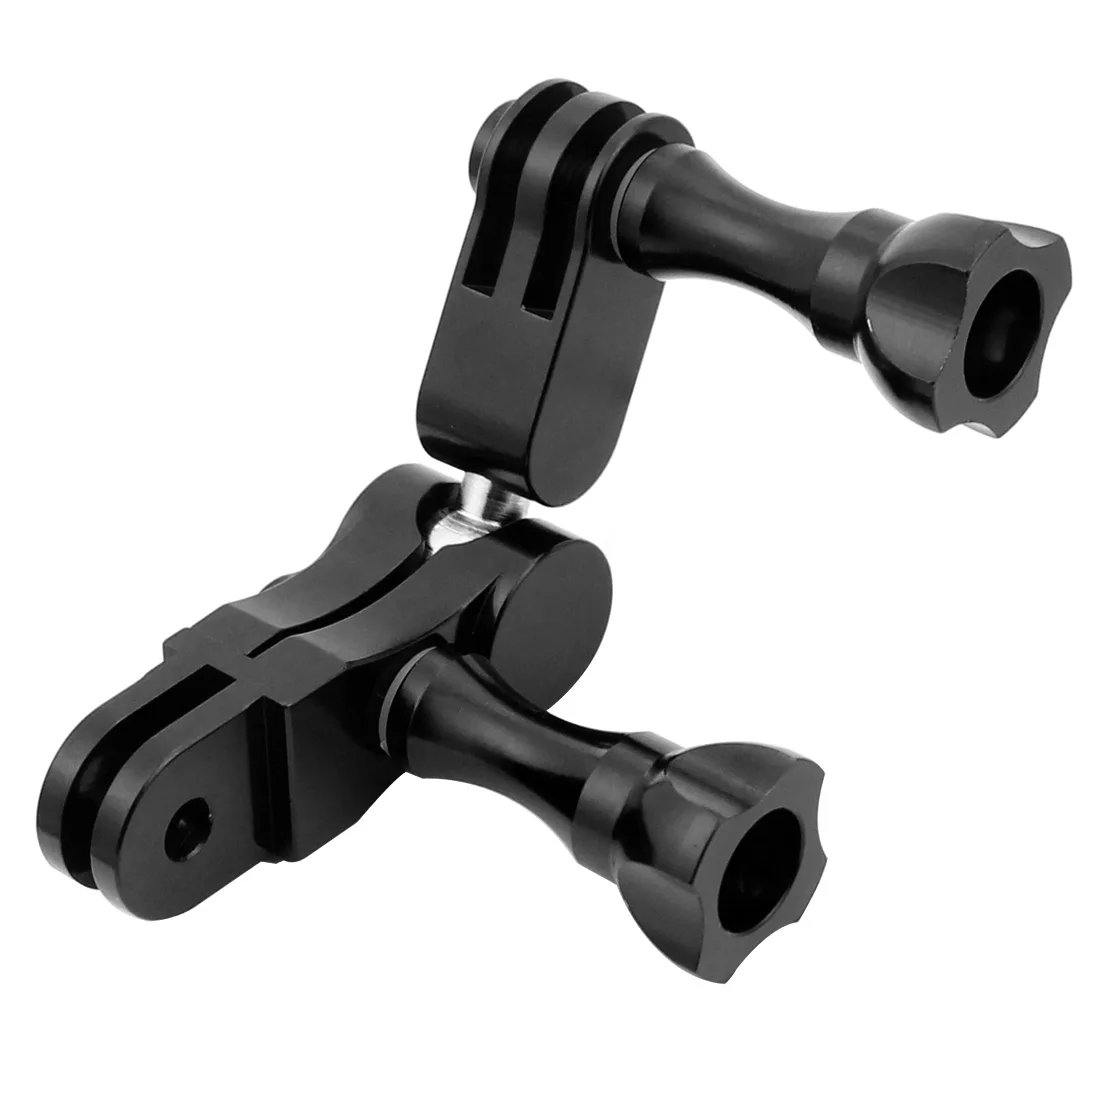 360 Degree Swivel Rotation Pivot Arm Mount Extension Tripod Adapter for GoPro Hero 7/6/5/4 for Xiaoyi Sport Camera for DJI Osmo Action for SJcam etc